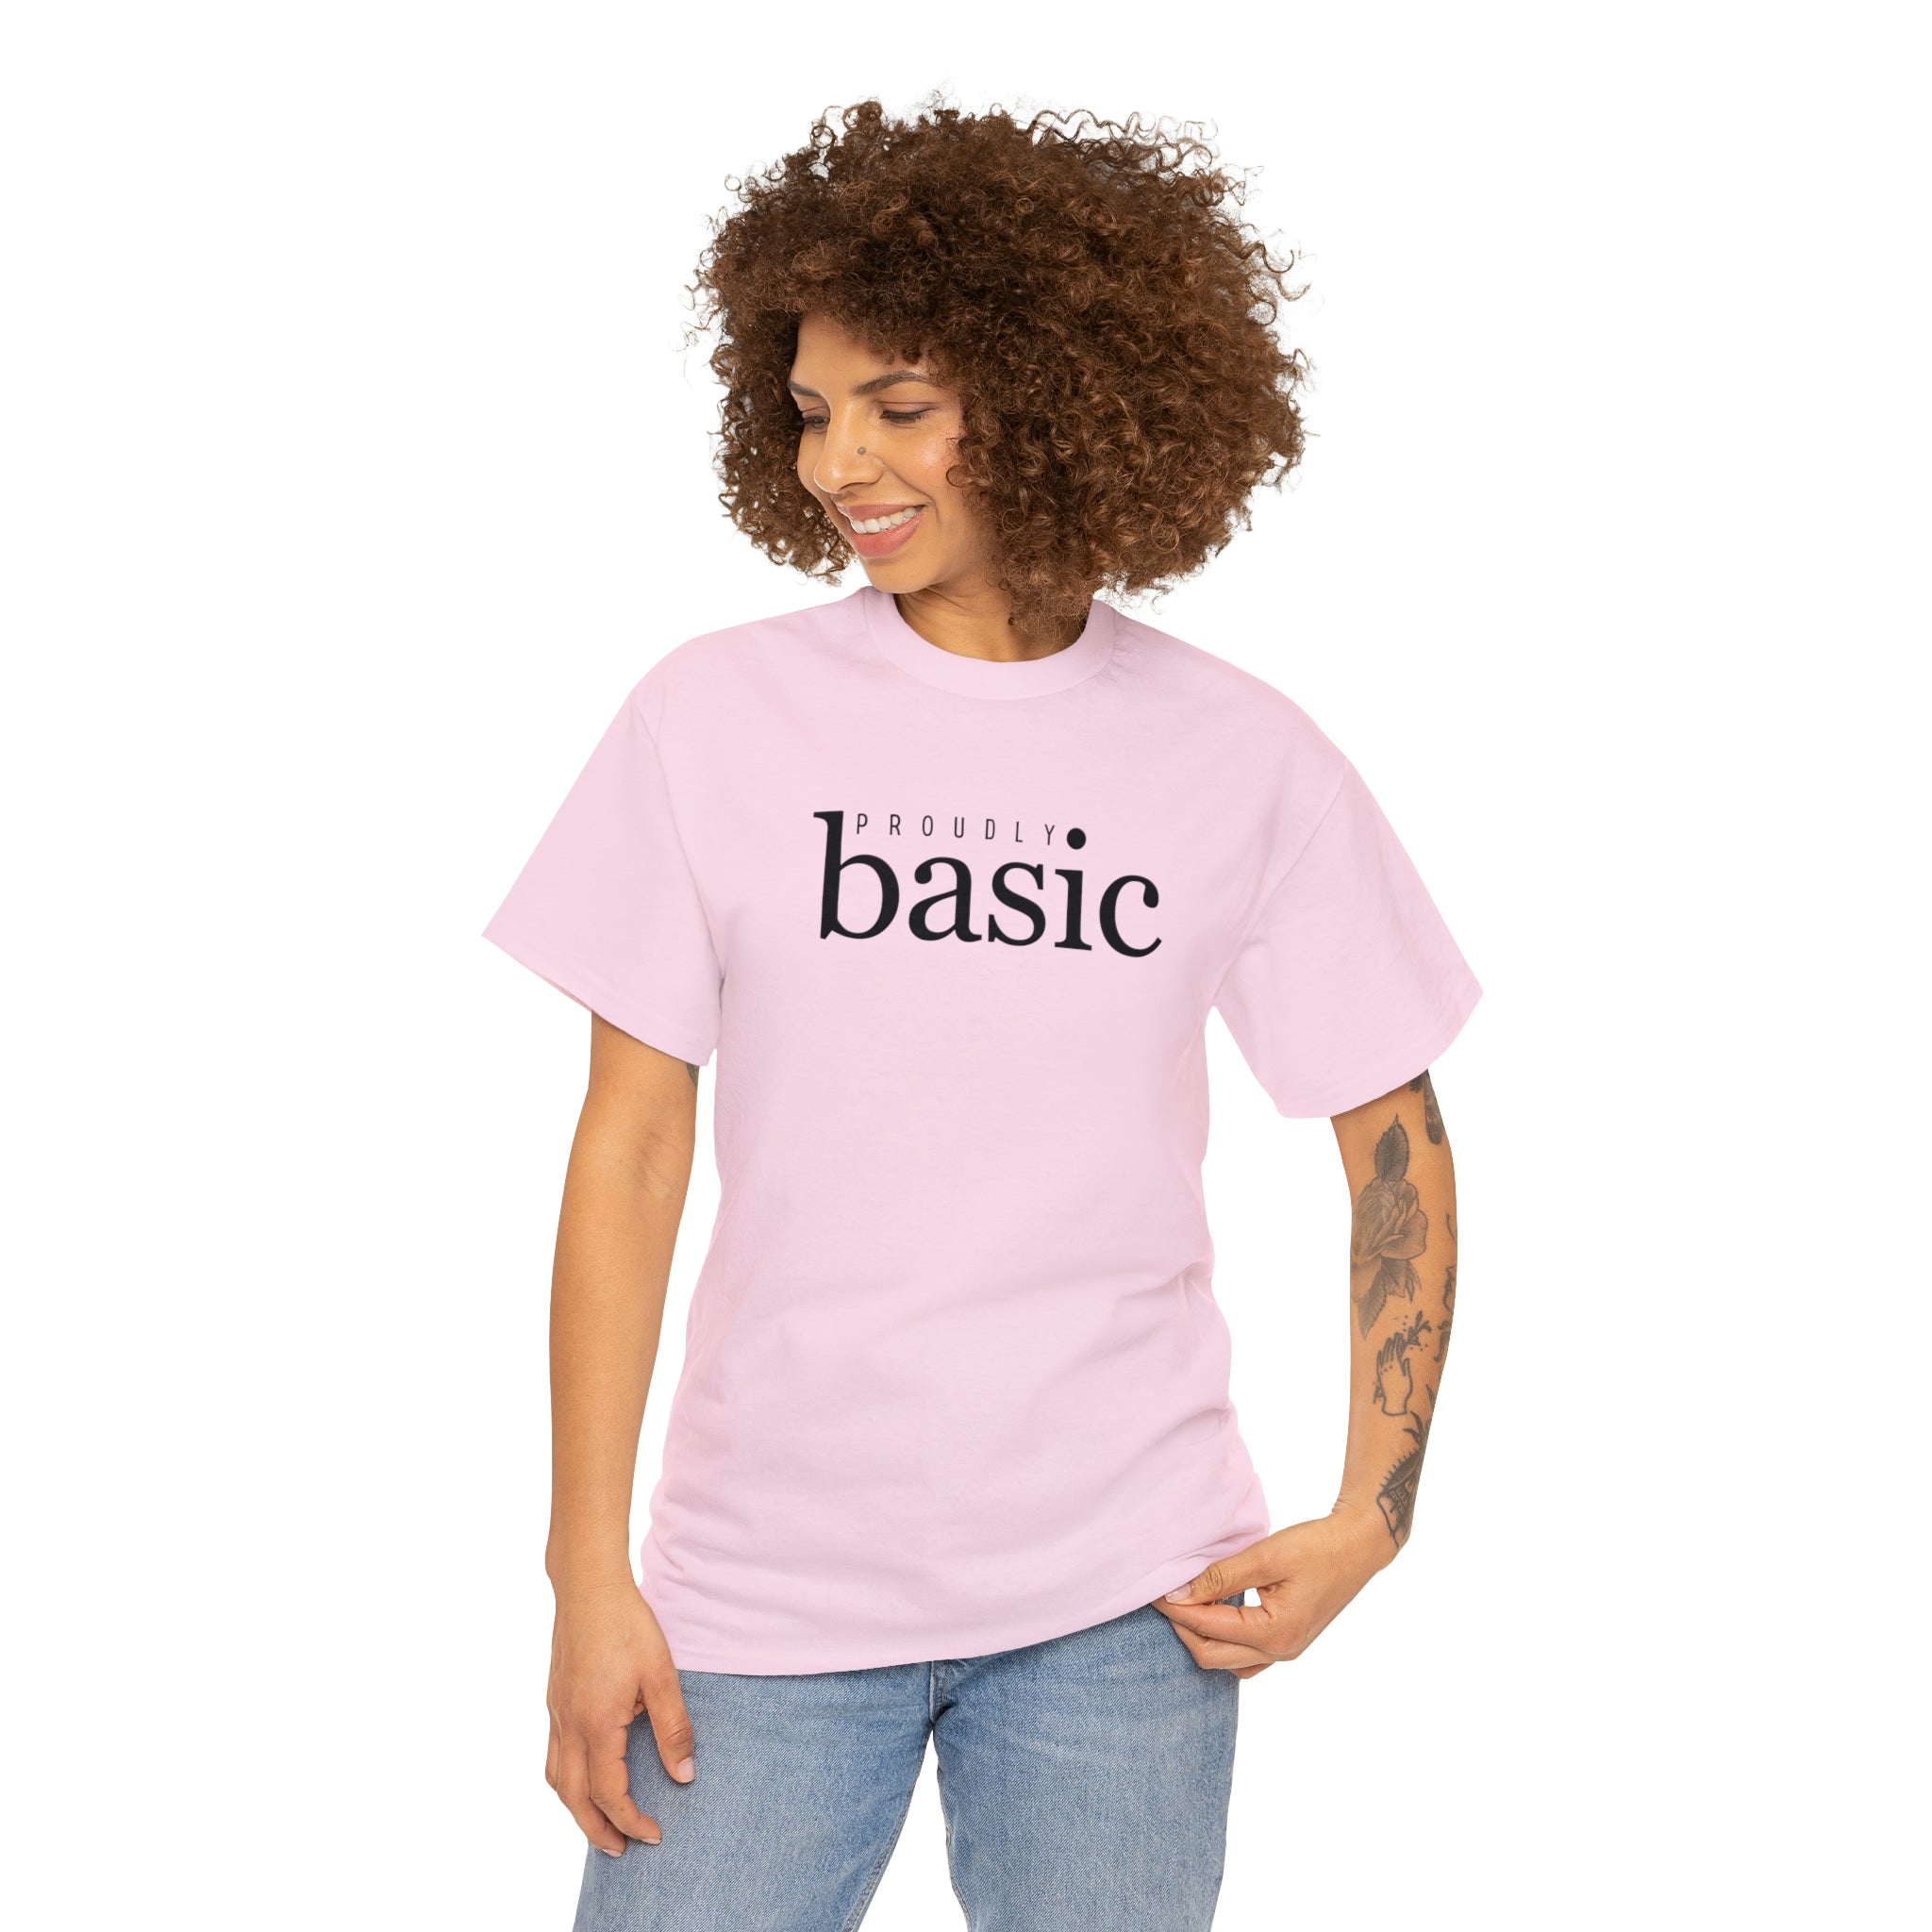  Proudly BASIC Relaxed-Fit Cotton T-Shirt, Female Empowerment Shirt, Cute Graphic T-shirt T-ShirtLightPink5XL